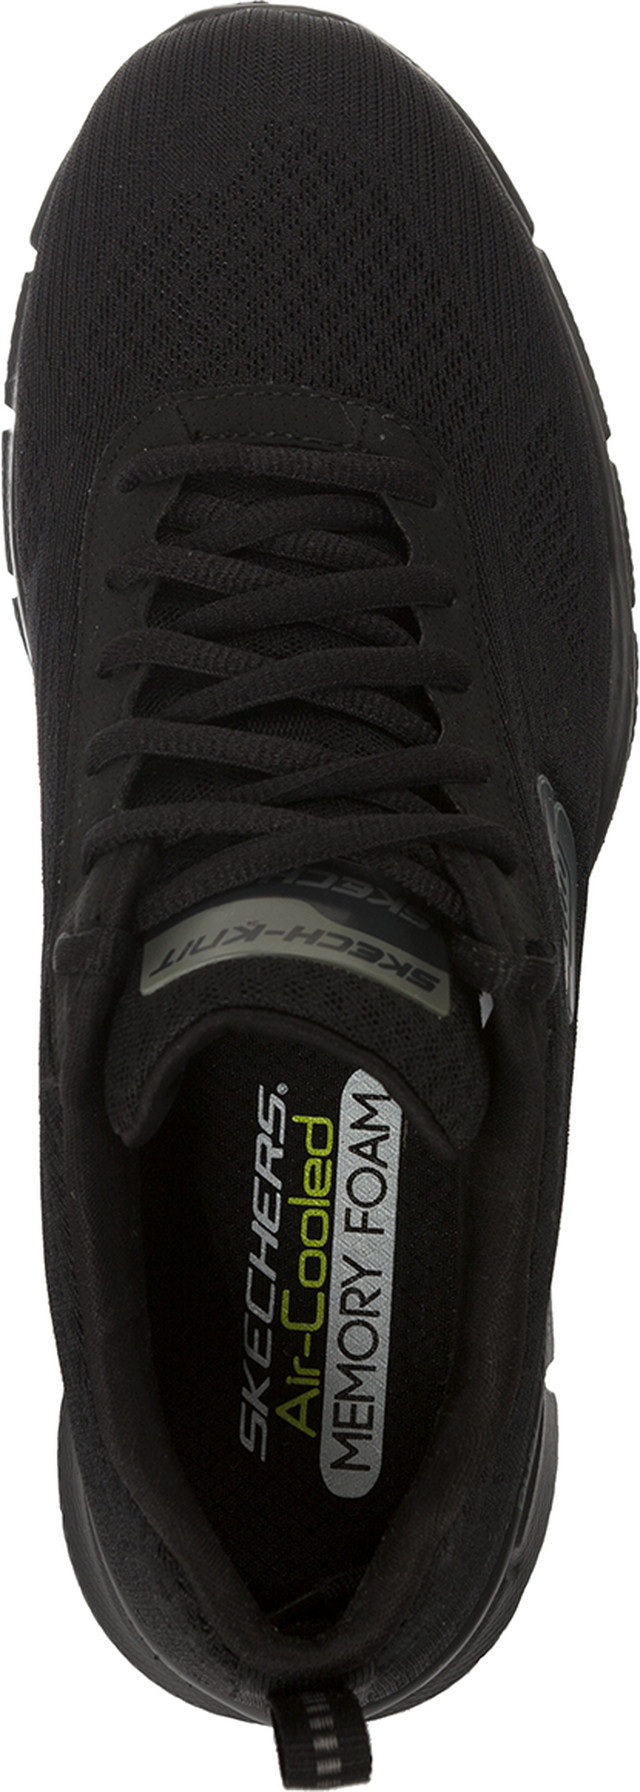 skechers air cooled